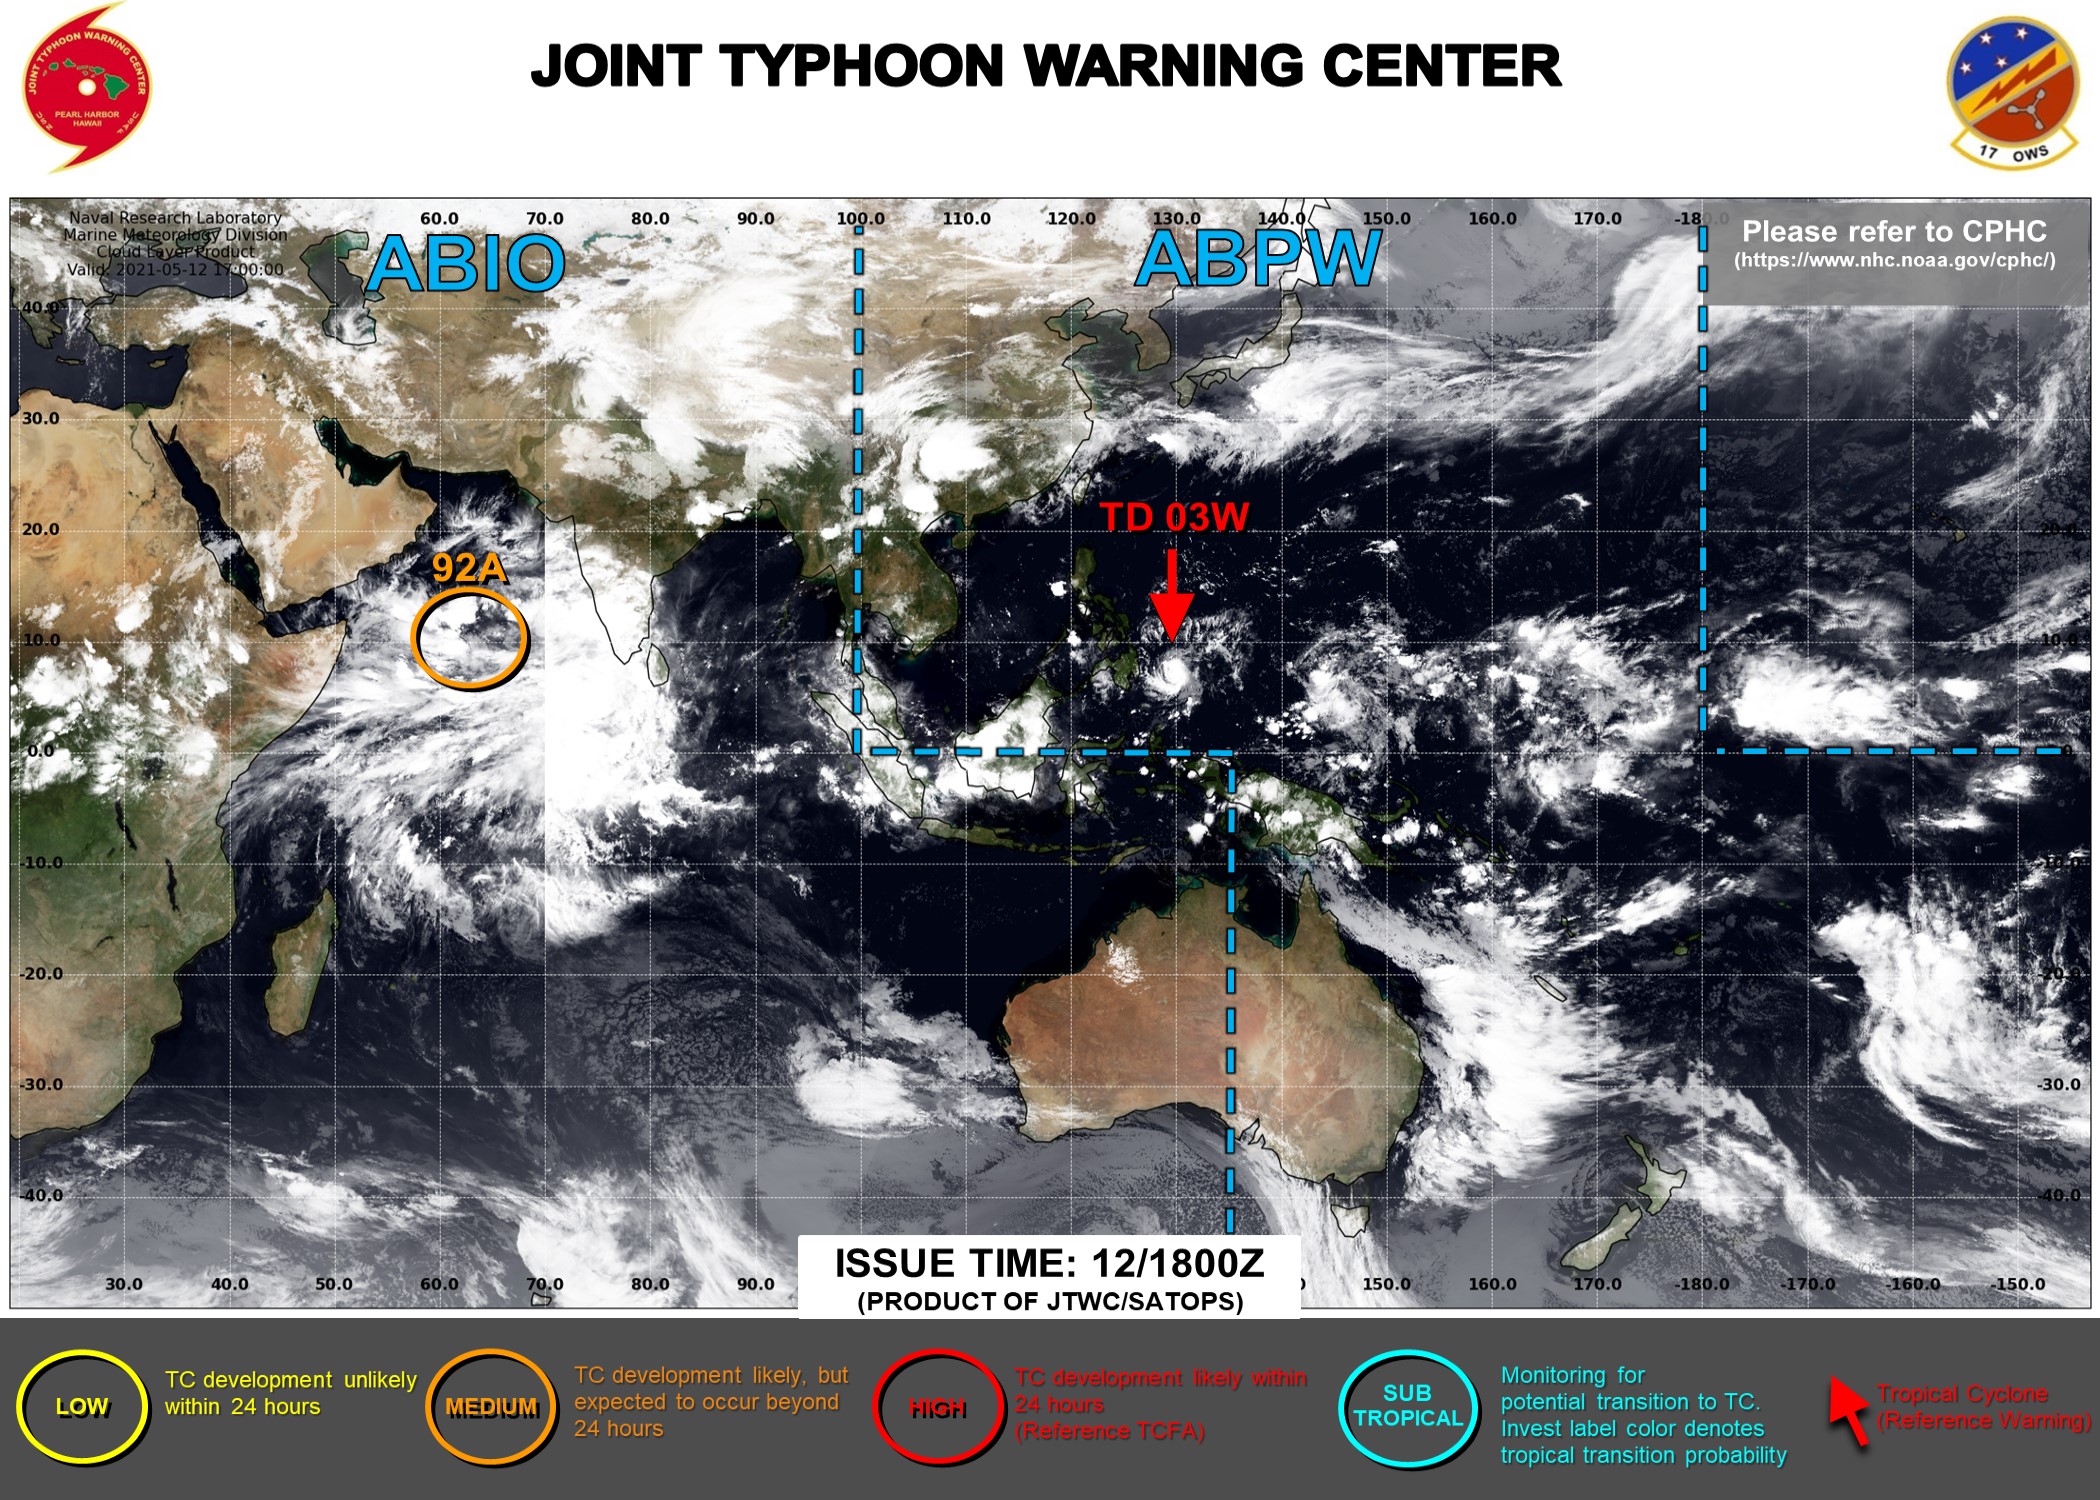 JTWC IS ISSUING 6HOURLY WARNINGS AND 3HOURLY SATELLITE BULLETINS ON 03W. INVEST 92A REMAINS MEDIUM: MODERATE CHANCES OF HAVING 35KNOT WINDS NEAR ITS CENTER WITHIN 24HOURS.